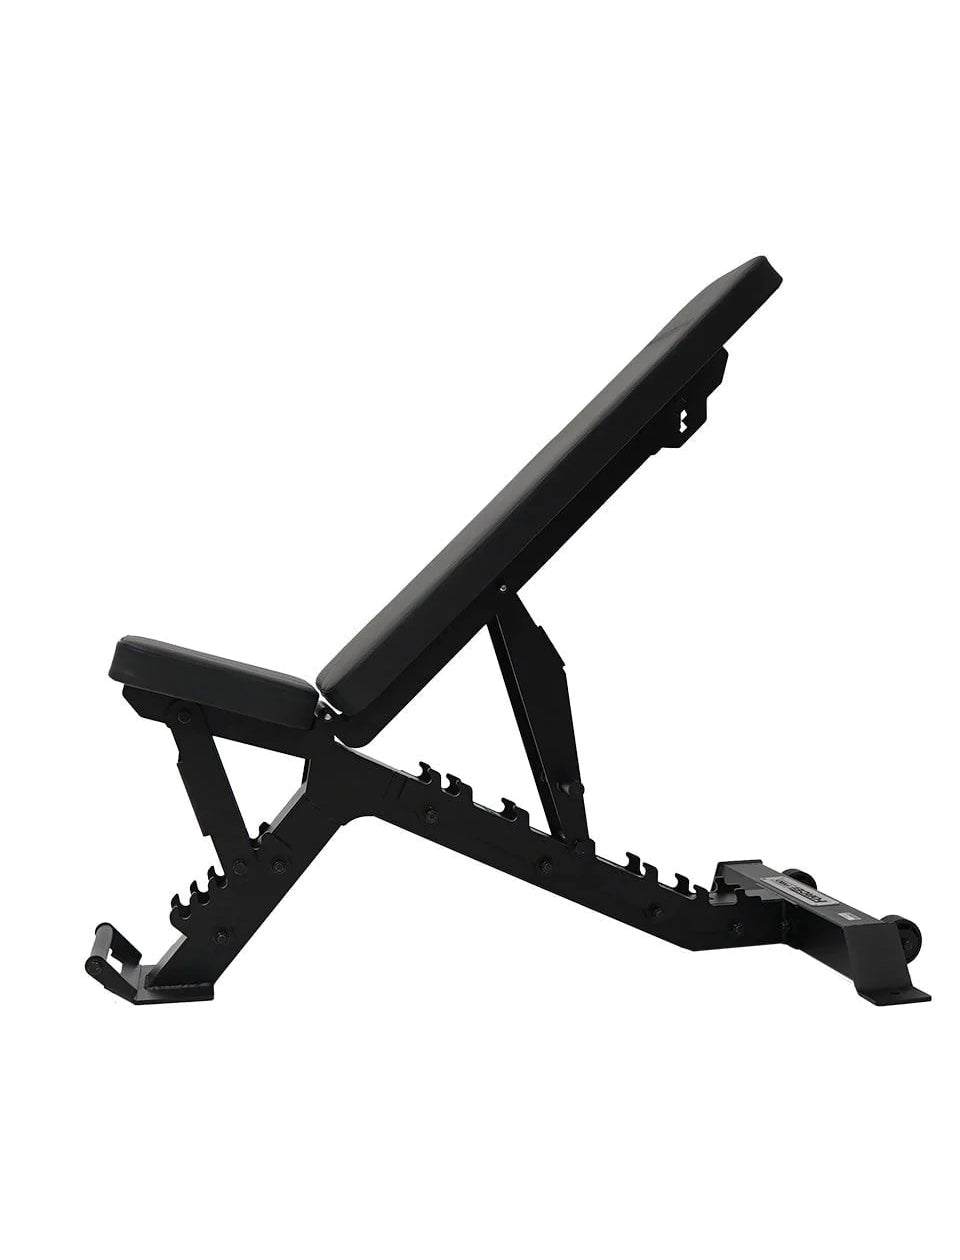 1441 Fitness Series FID Bench - A8008